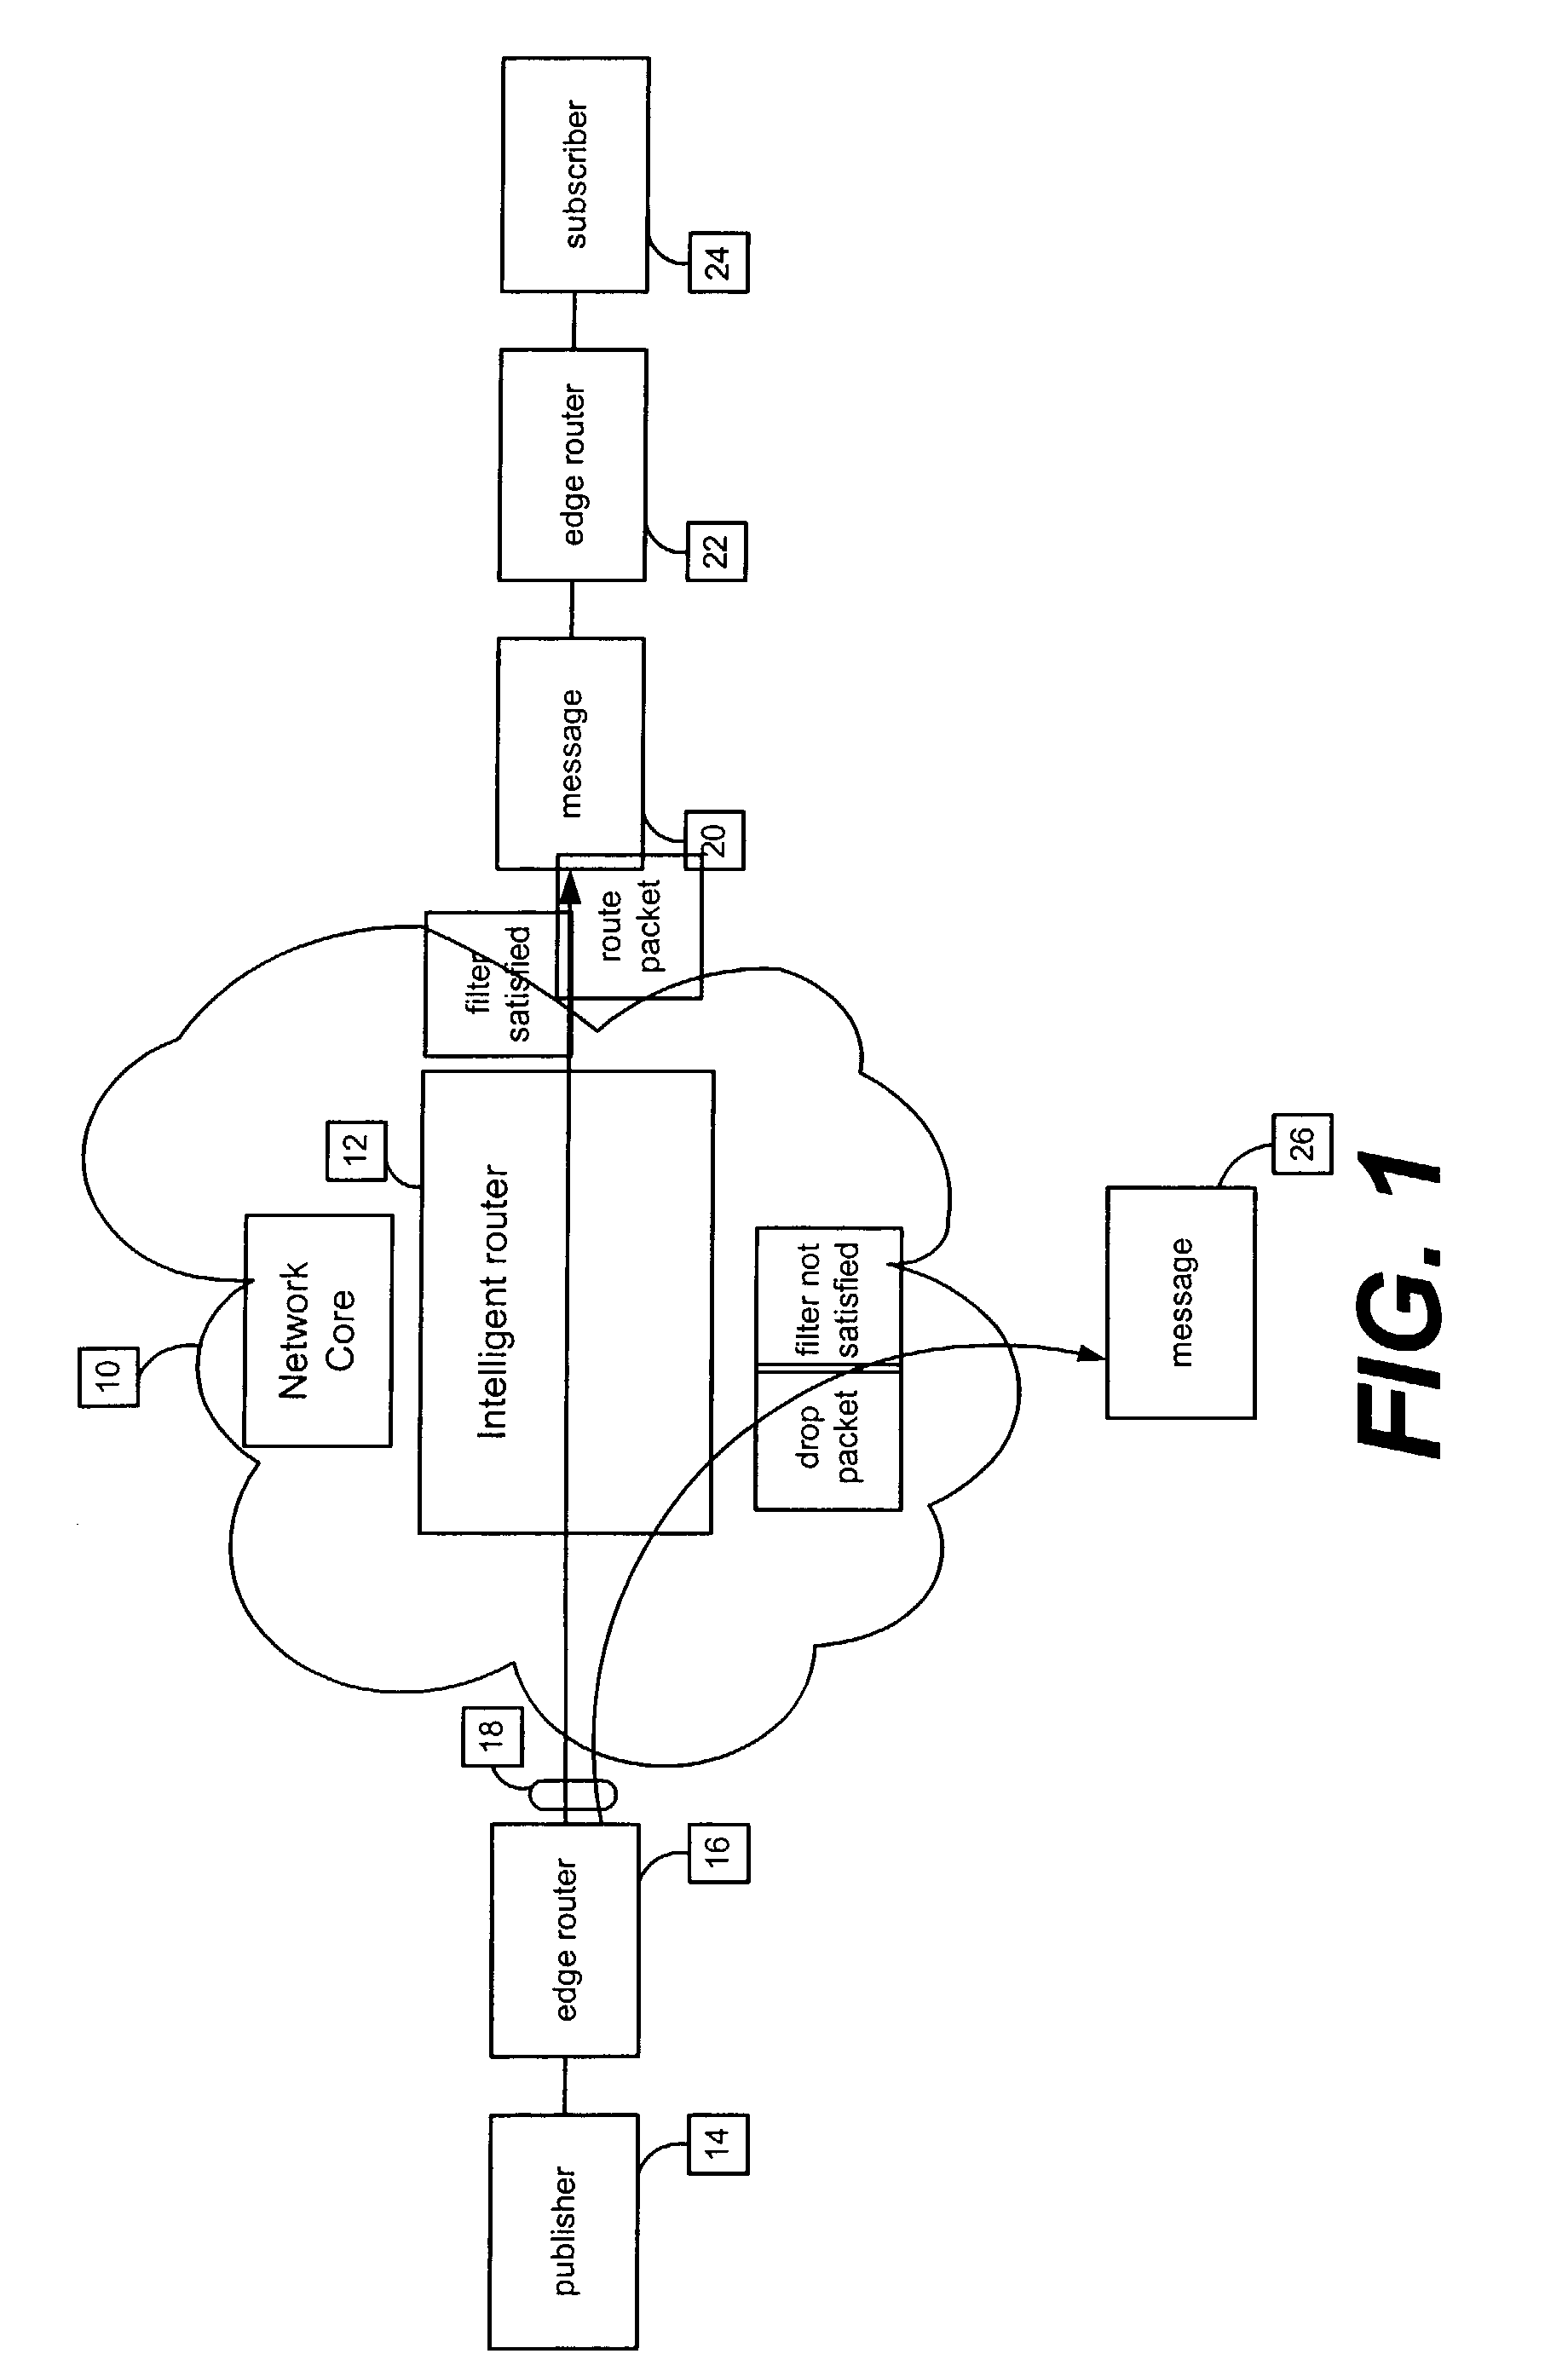 Method and apparatus for implementing query-response interactions in a publish-subscribe network